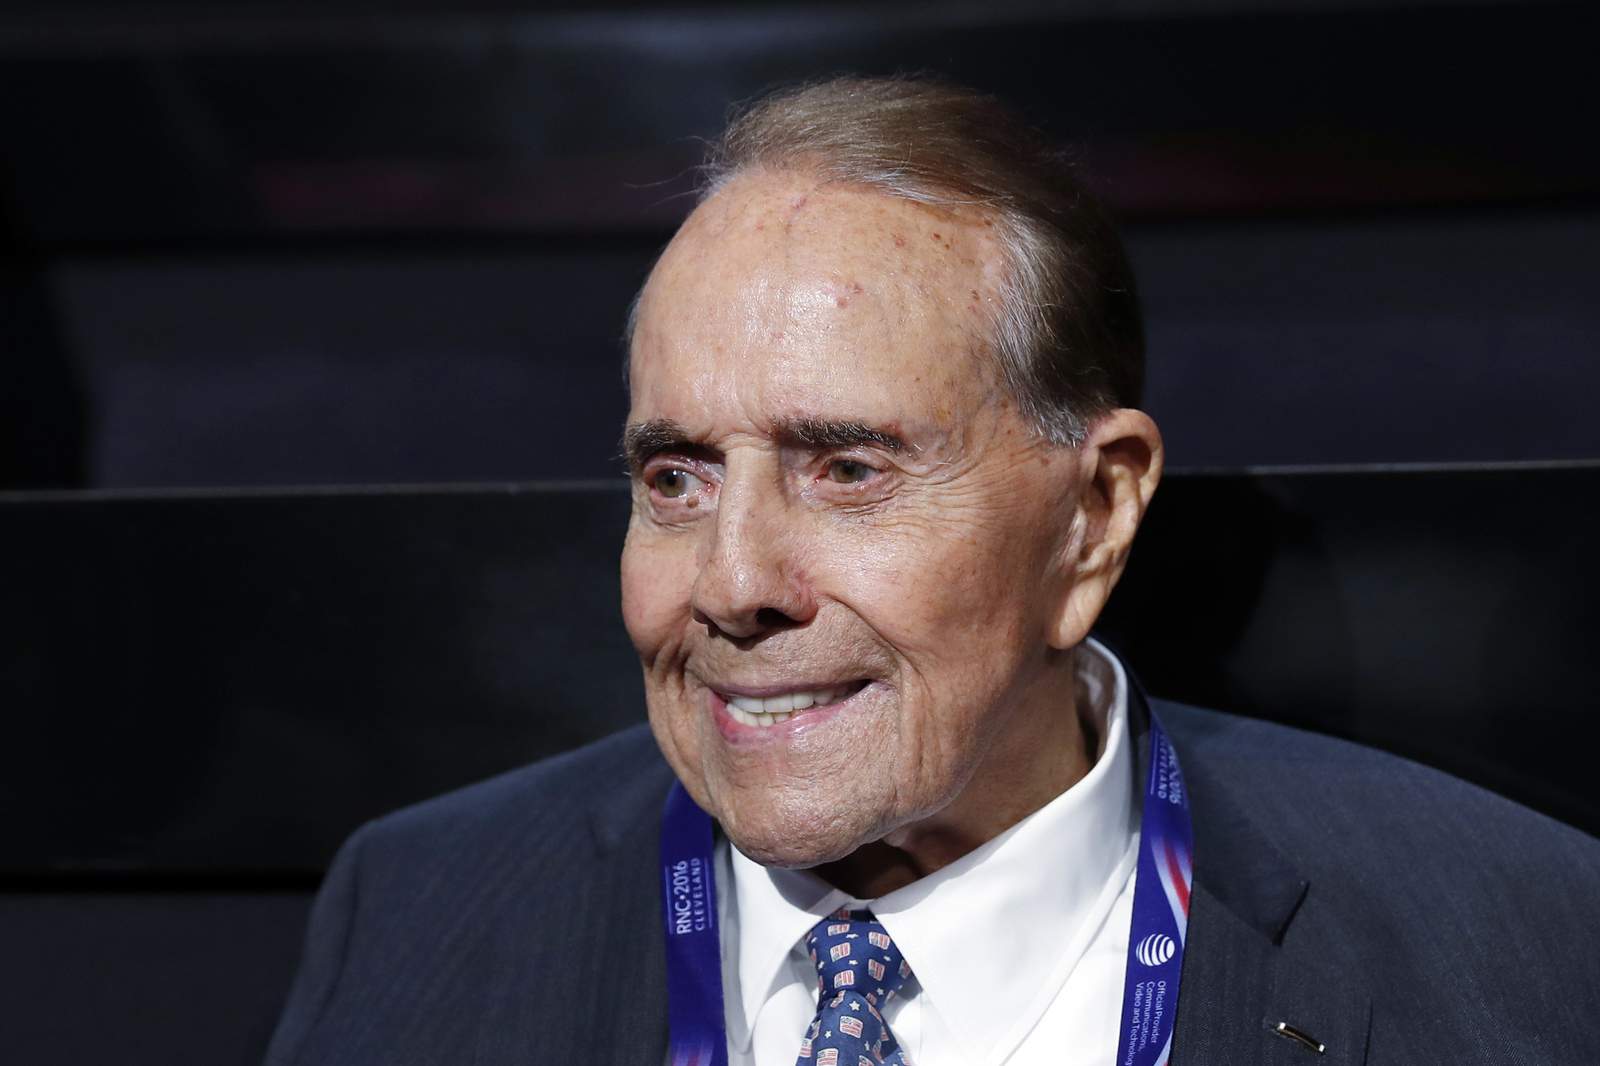 Bob Dole says he's been diagnosed with Stage 4 lung cancer